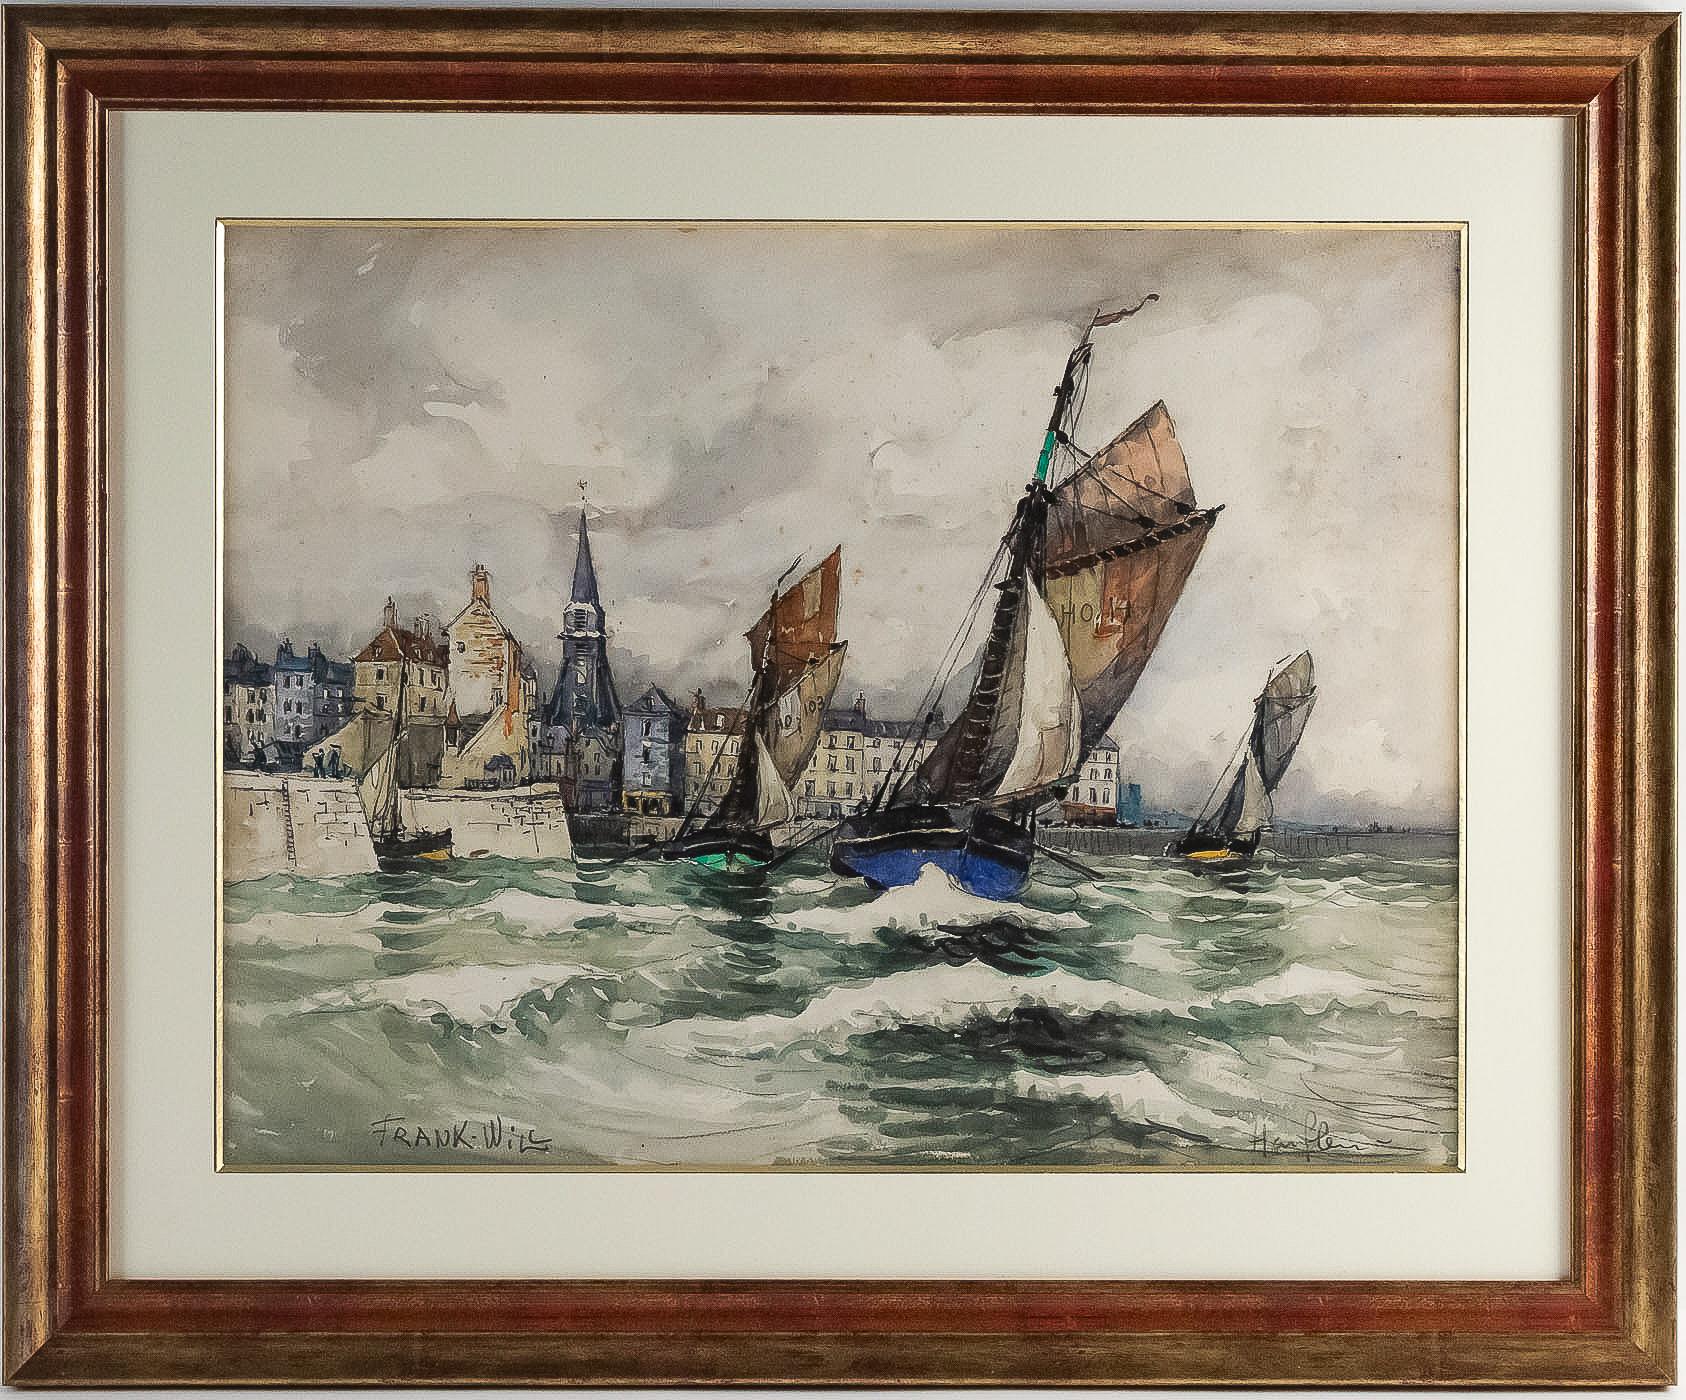 Frank Will, watercolor, View of Honfleur, circa 1930s.

A beautiful watercolor sign on a lower left by Frank Will, French, and American painter and watercolorist. Our painting a view of Honfleur harbor in the 1930s.

Our watercolor is a good